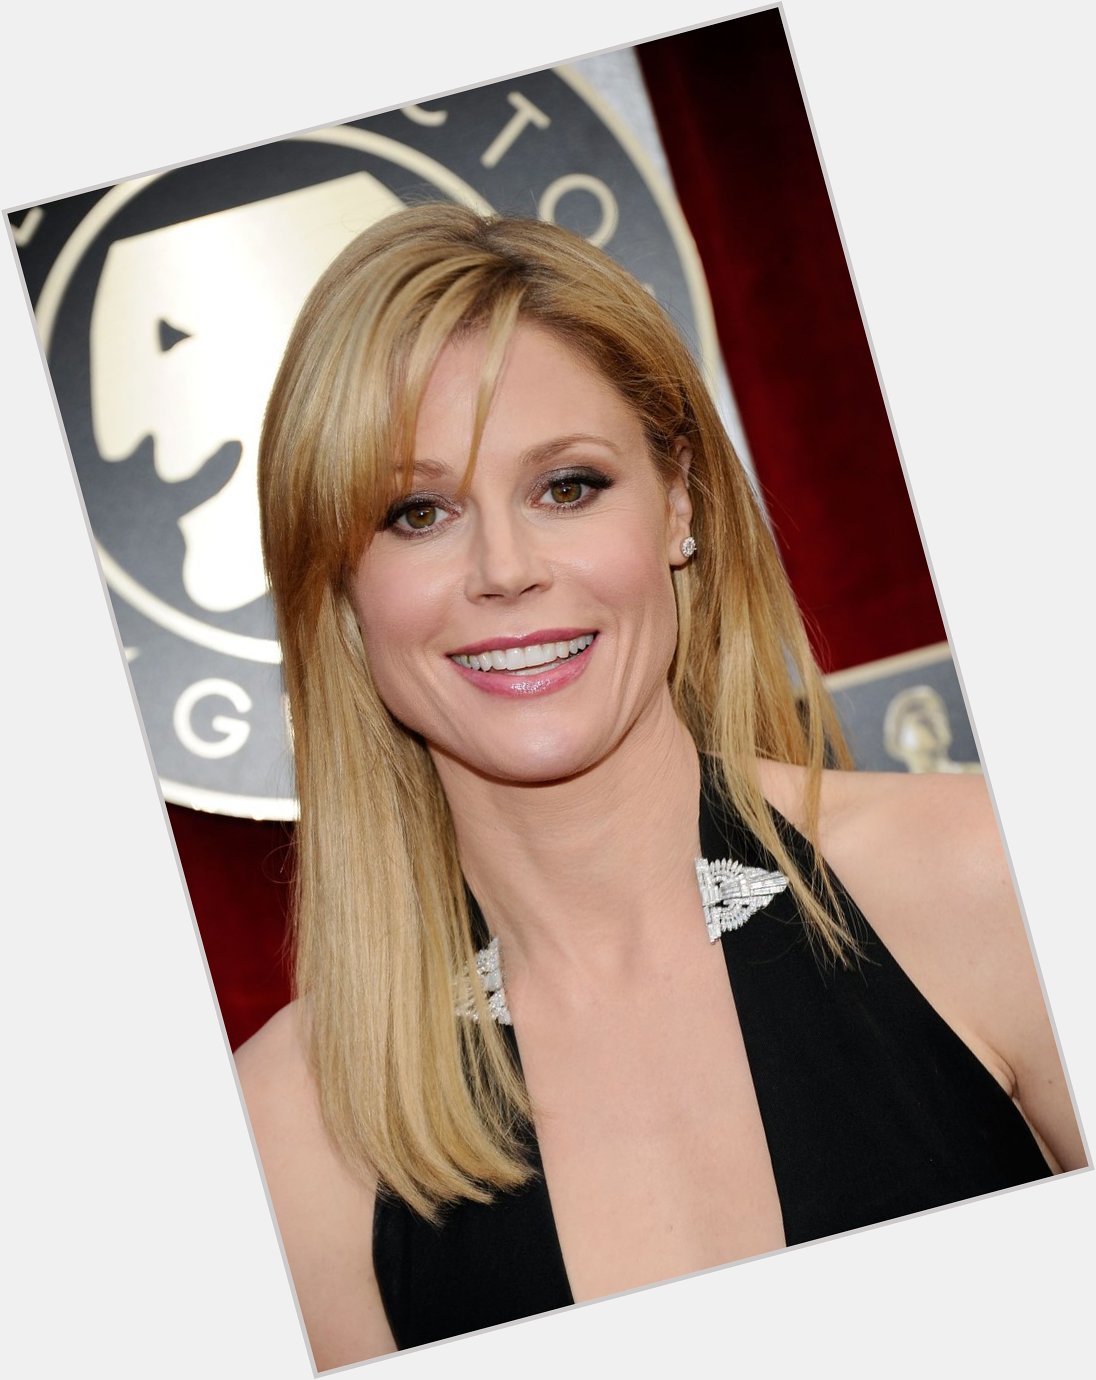 Happy birthday to Julie Bowen!!

She is best known for her role as Claire Dunphy in Modern Family for 11 seasons. 